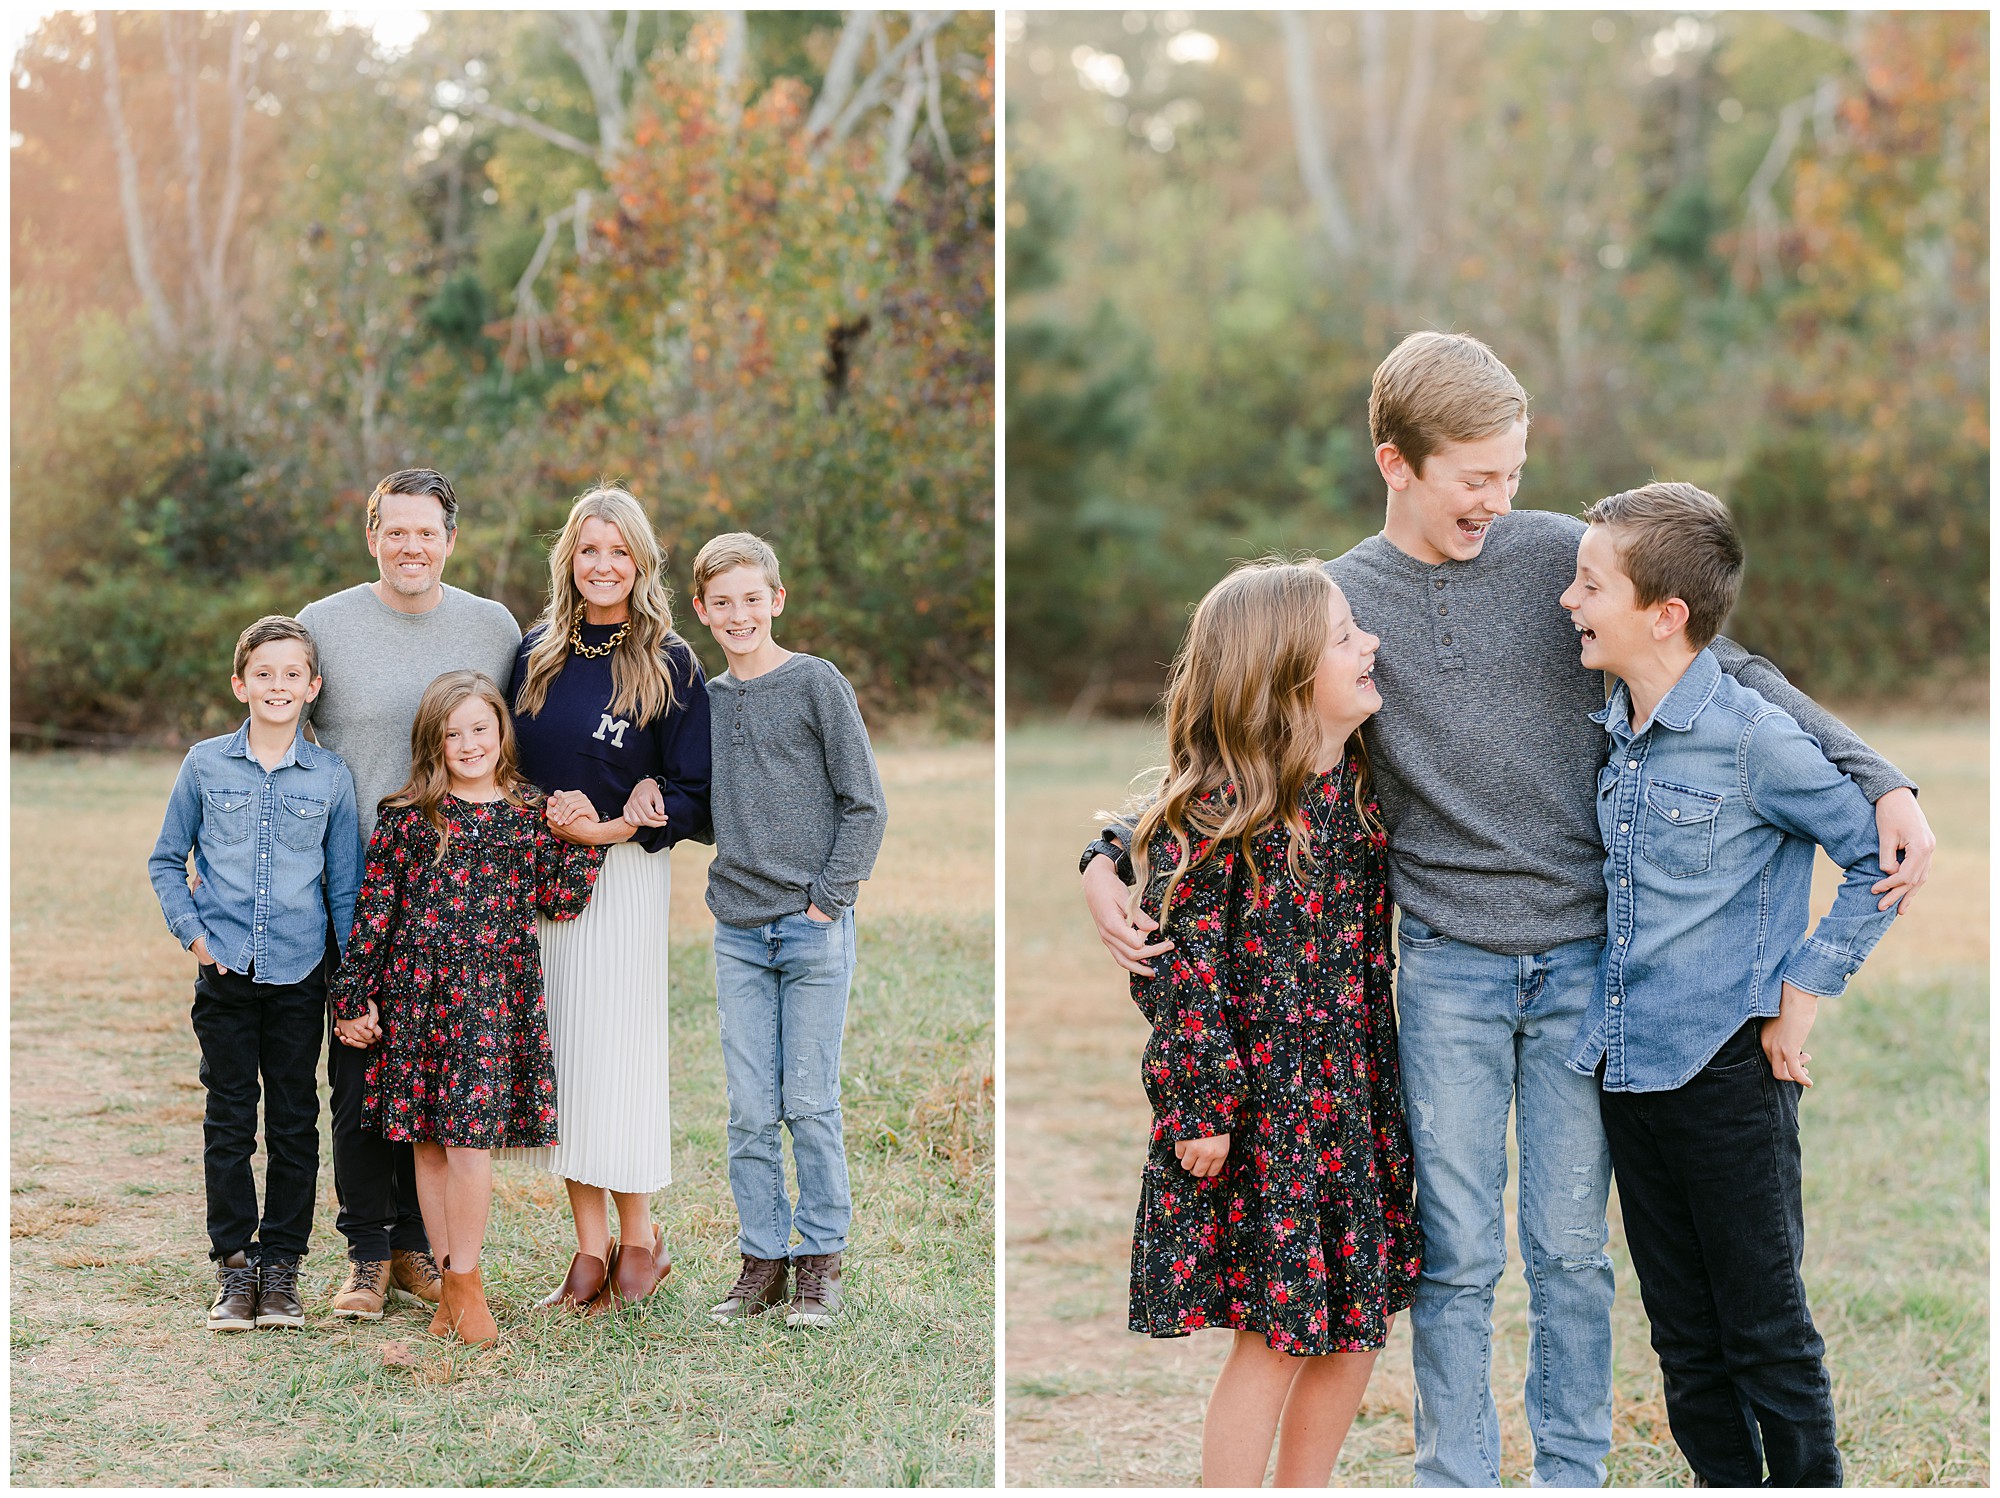 Fall family photos of a family of 5 in a field taken by Marietta family photographer Lindsey Powell.